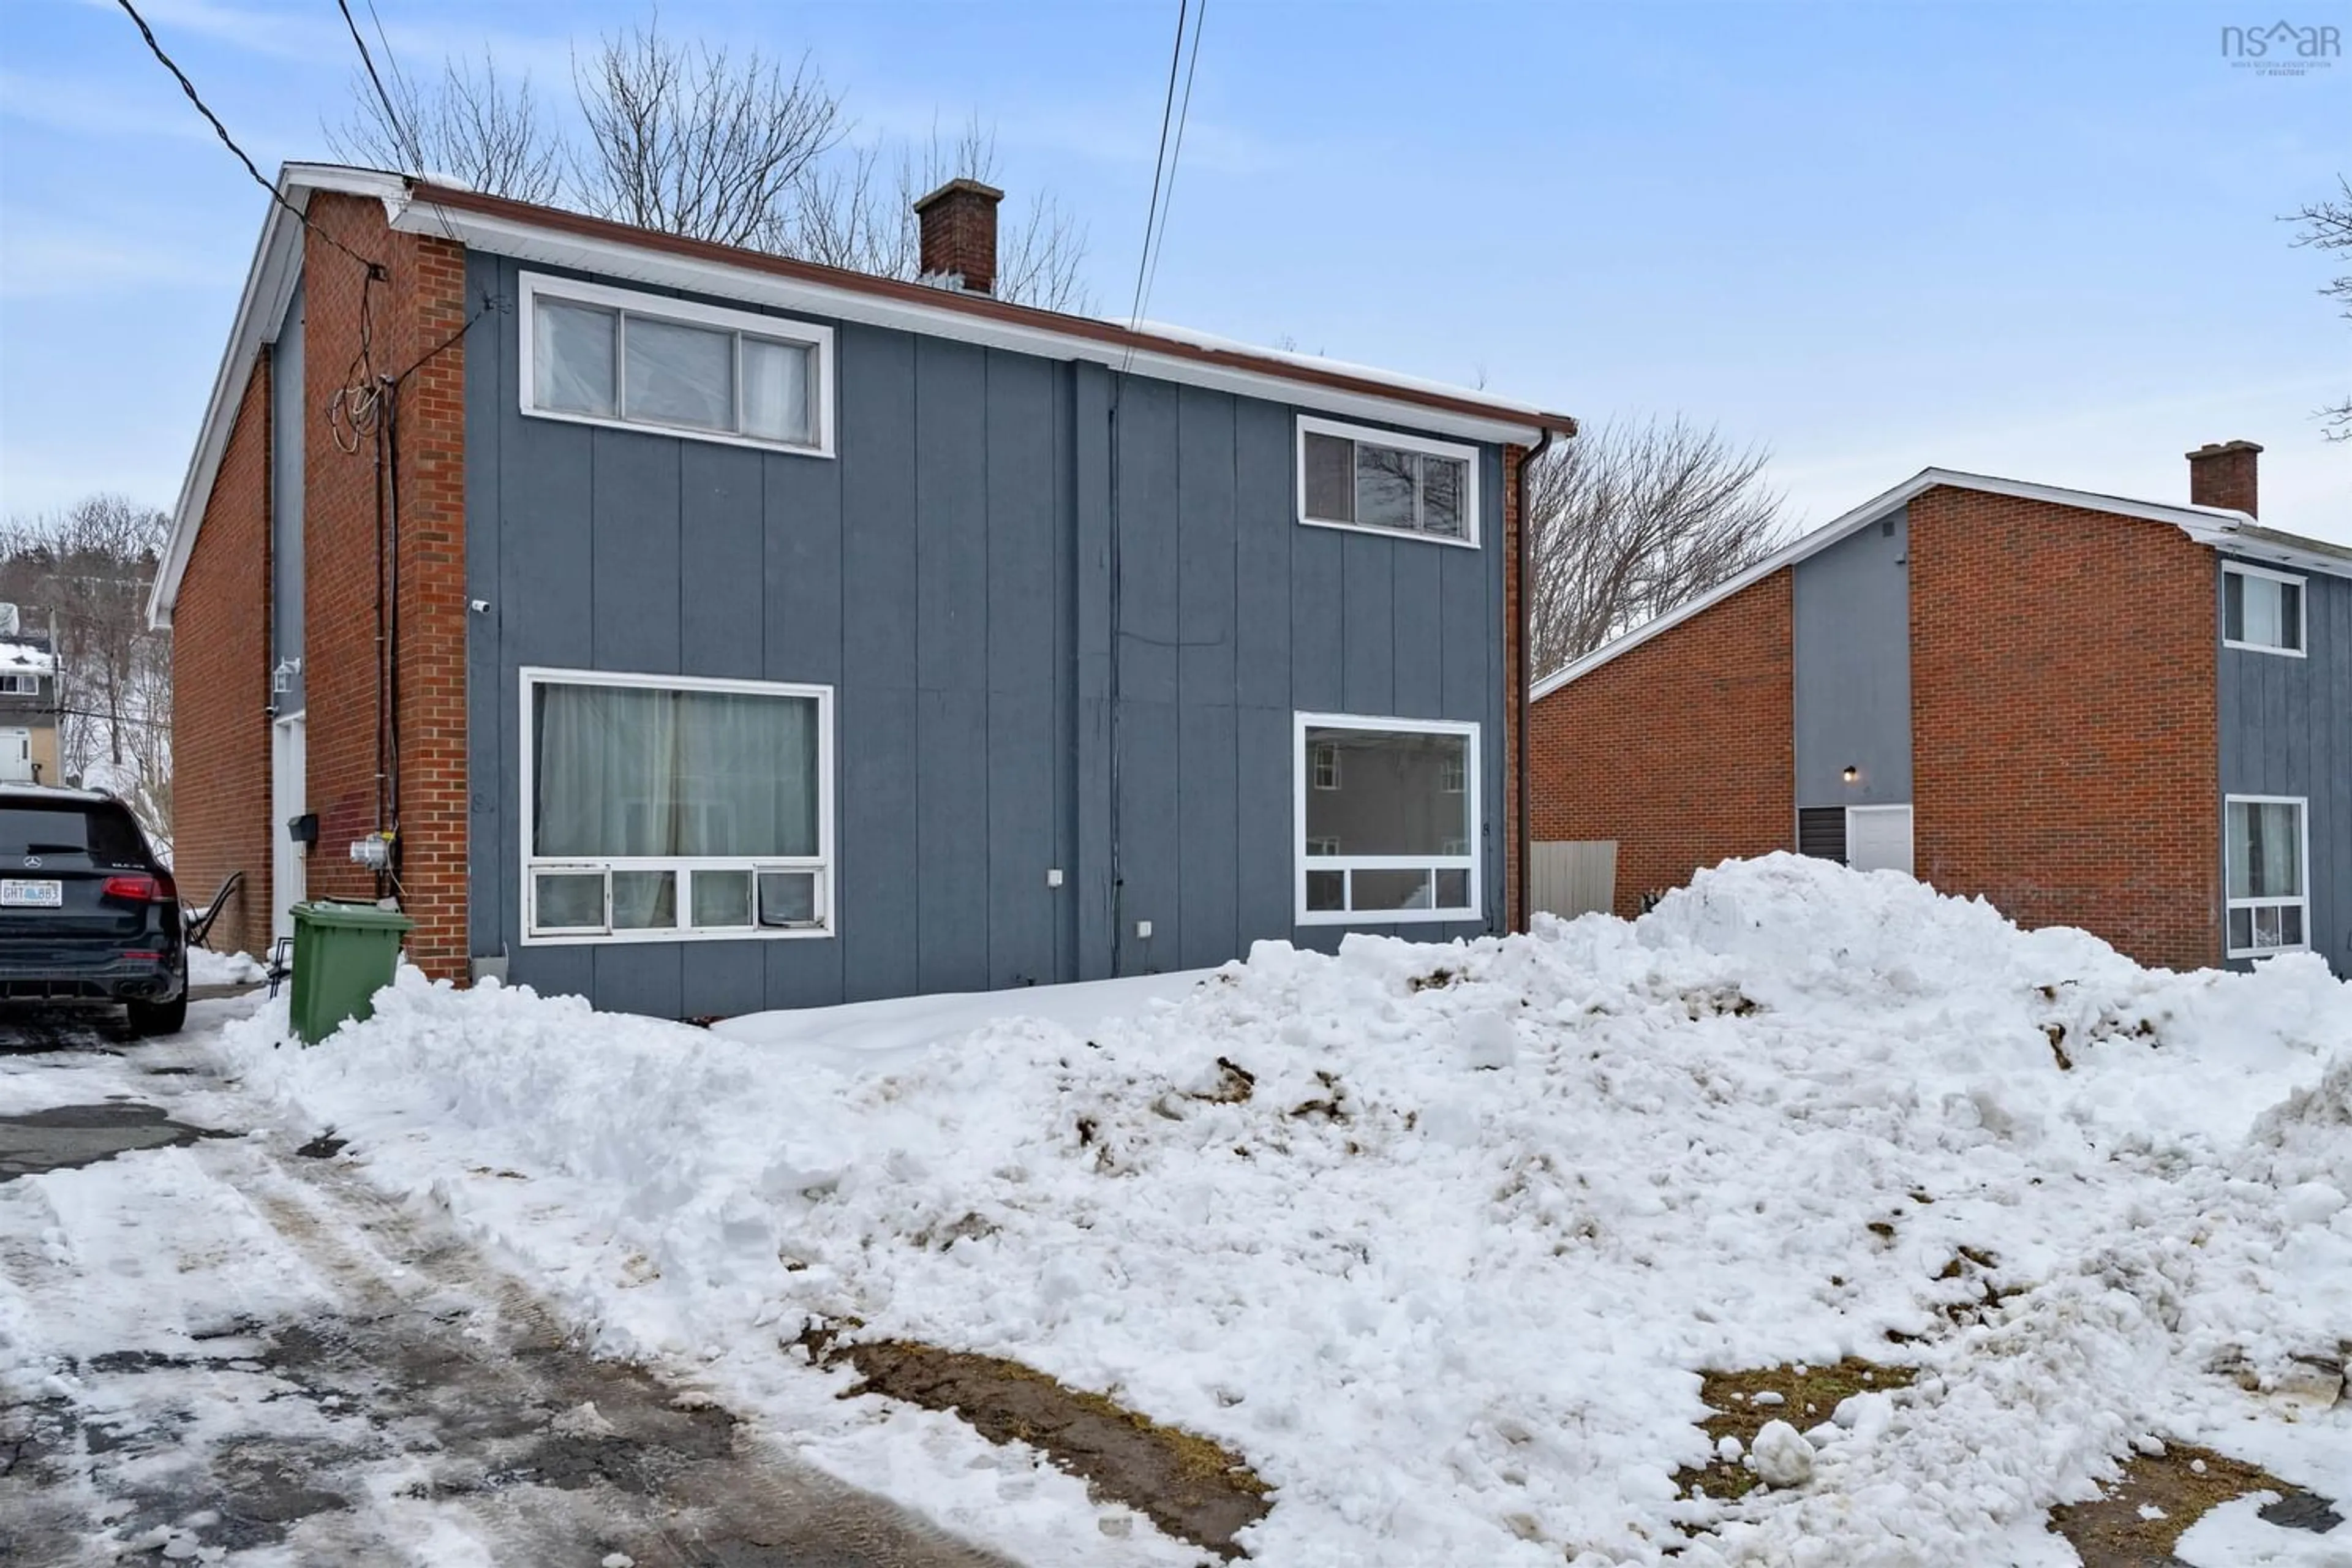 Home with unknown exterior material for 8-8A Ruben Crt, Dartmouth Nova Scotia B2X 1M1